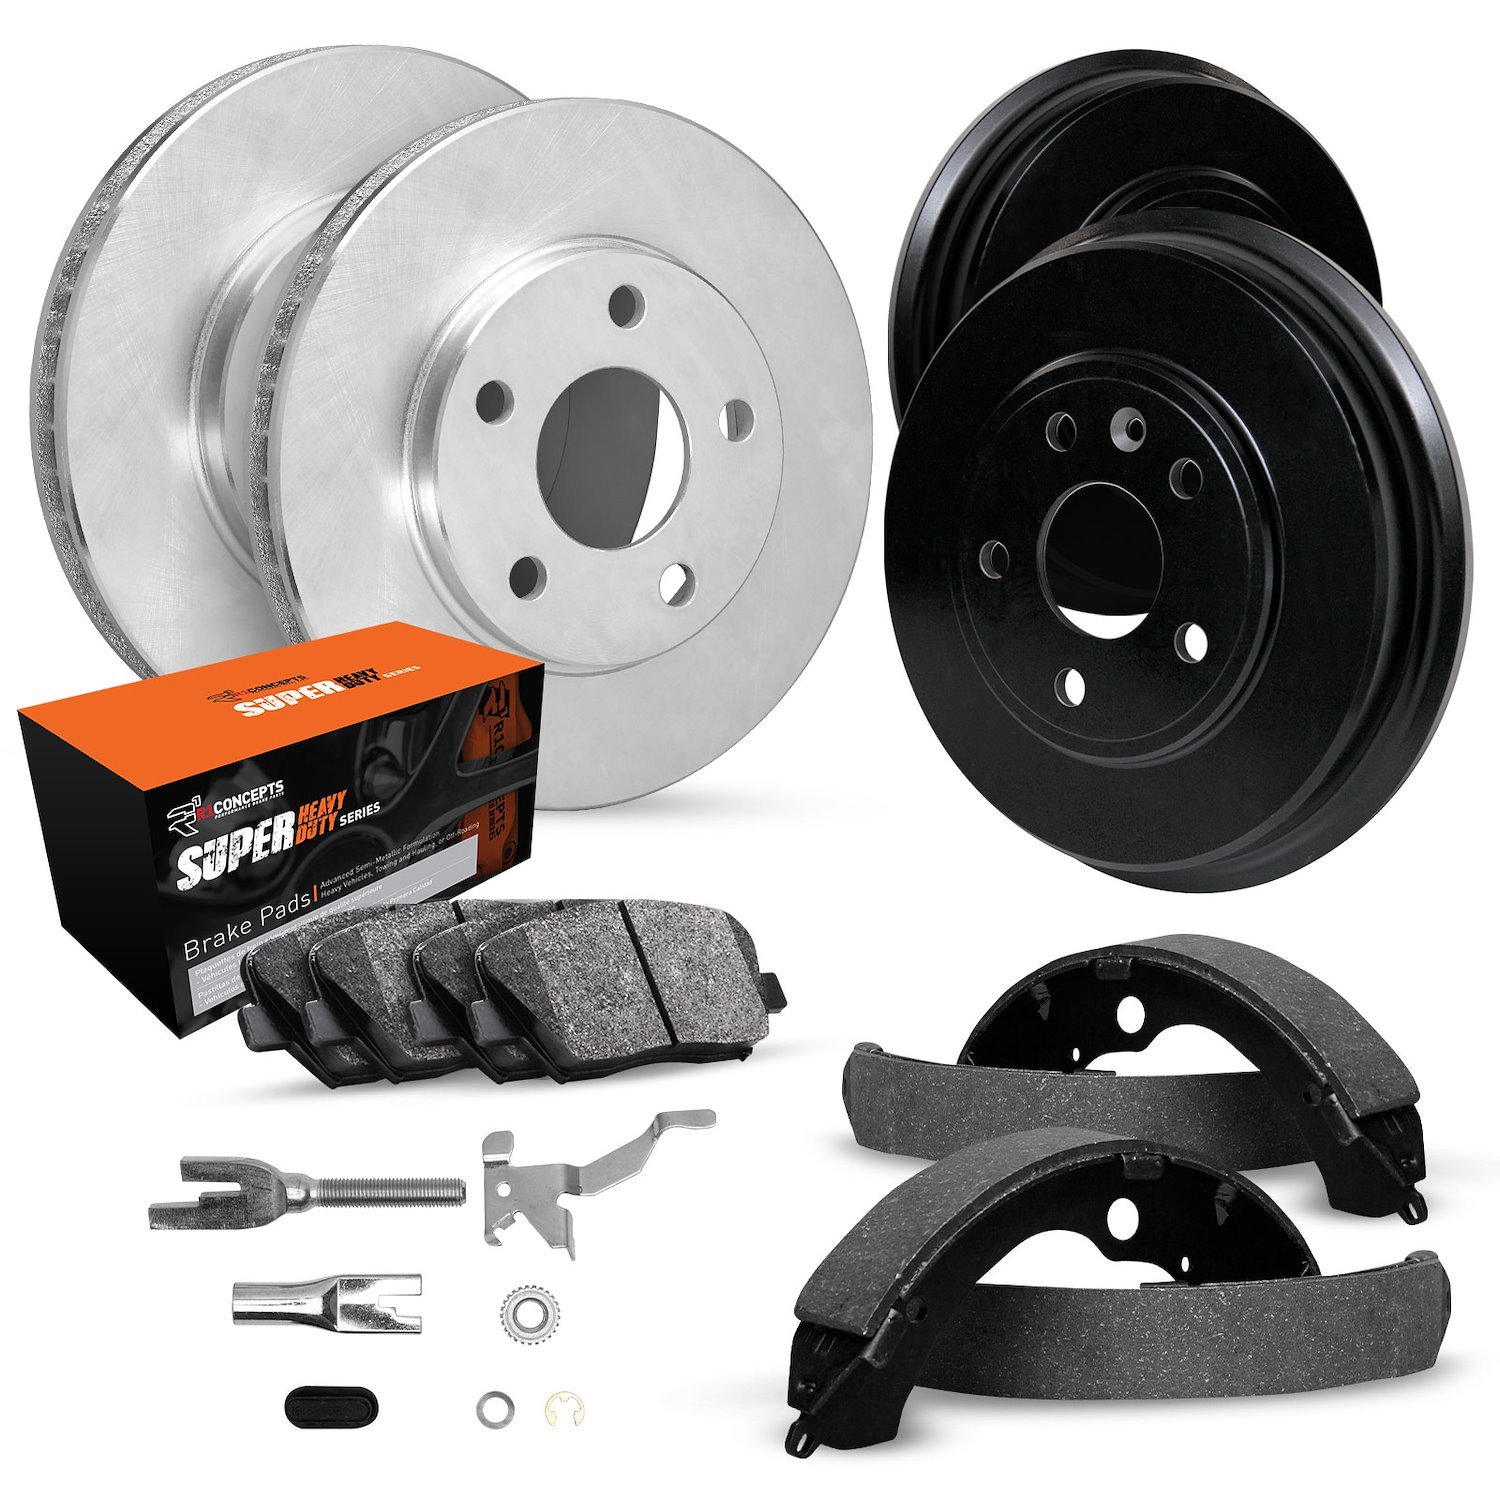 E-Line Blank Brake Rotor & Drum Set w/Super-Duty Pads, Shoes, & Adjusters, 1974-1996 GM, Position: Front & Rear